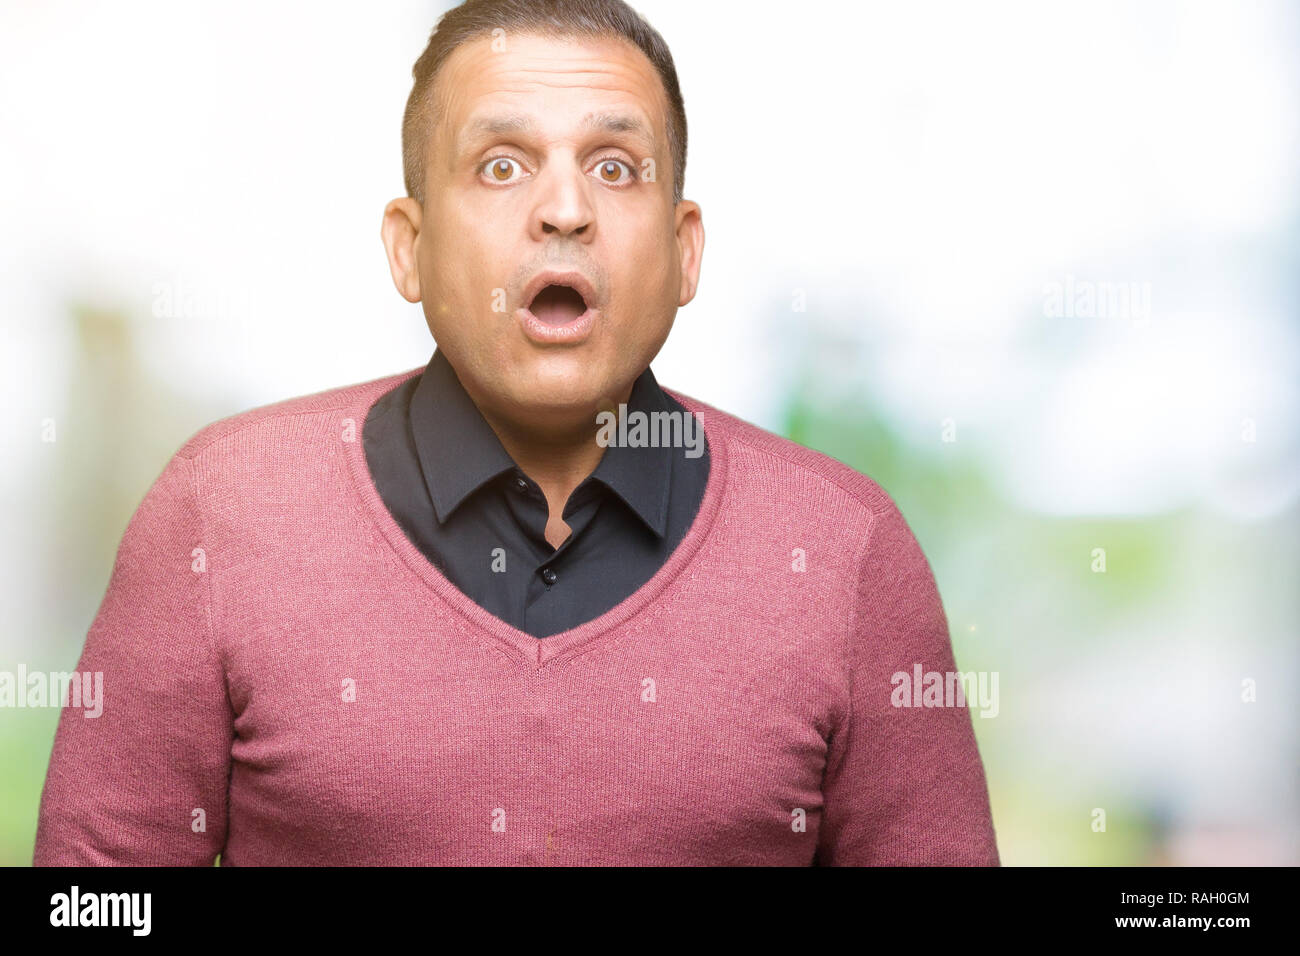 Middle age arab man over isolated background afraid and shocked with surprise expression, fear and excited face. Stock Photo